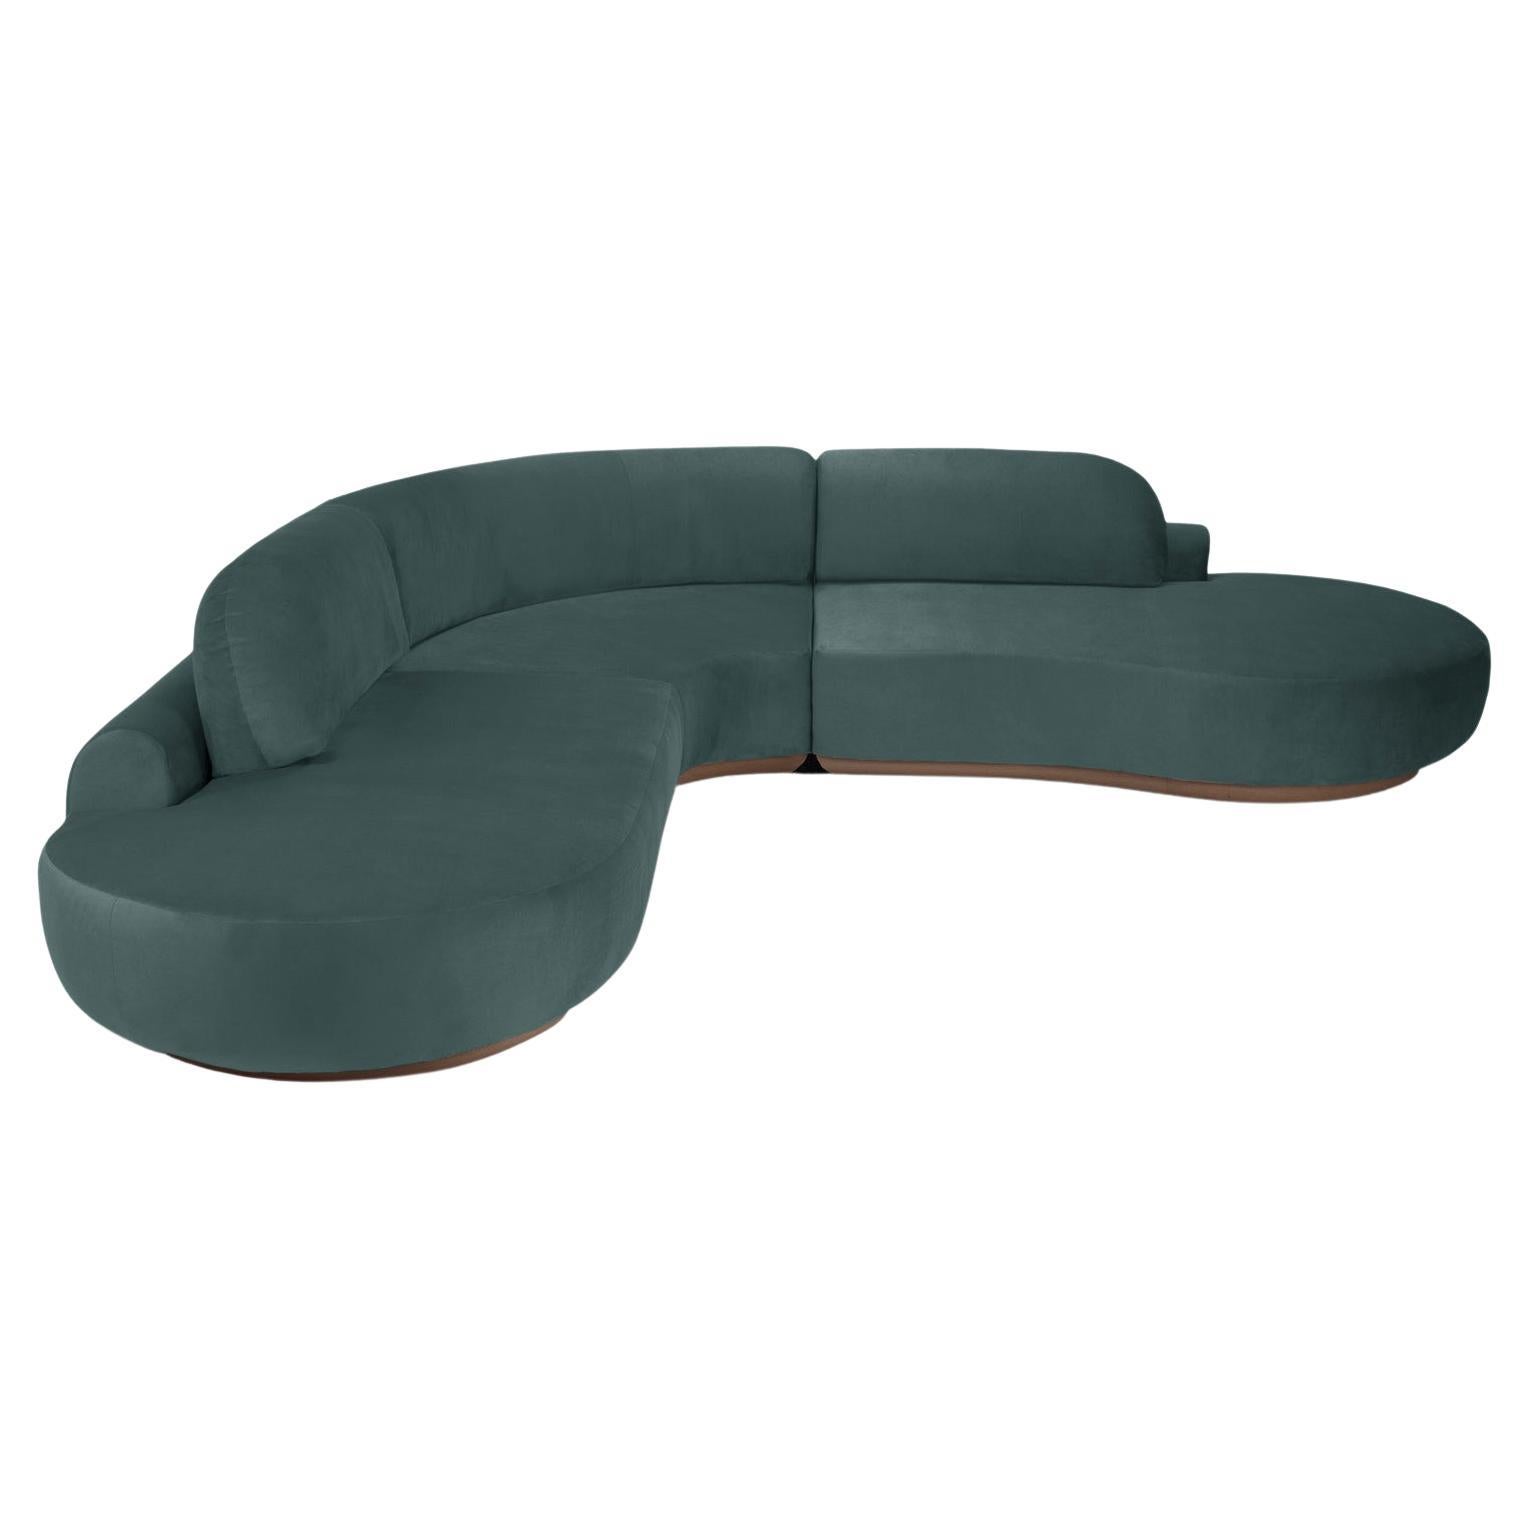 Naked Curved Sectional Sofa, 3 Piece with Beech Ash-056-1 and Teal